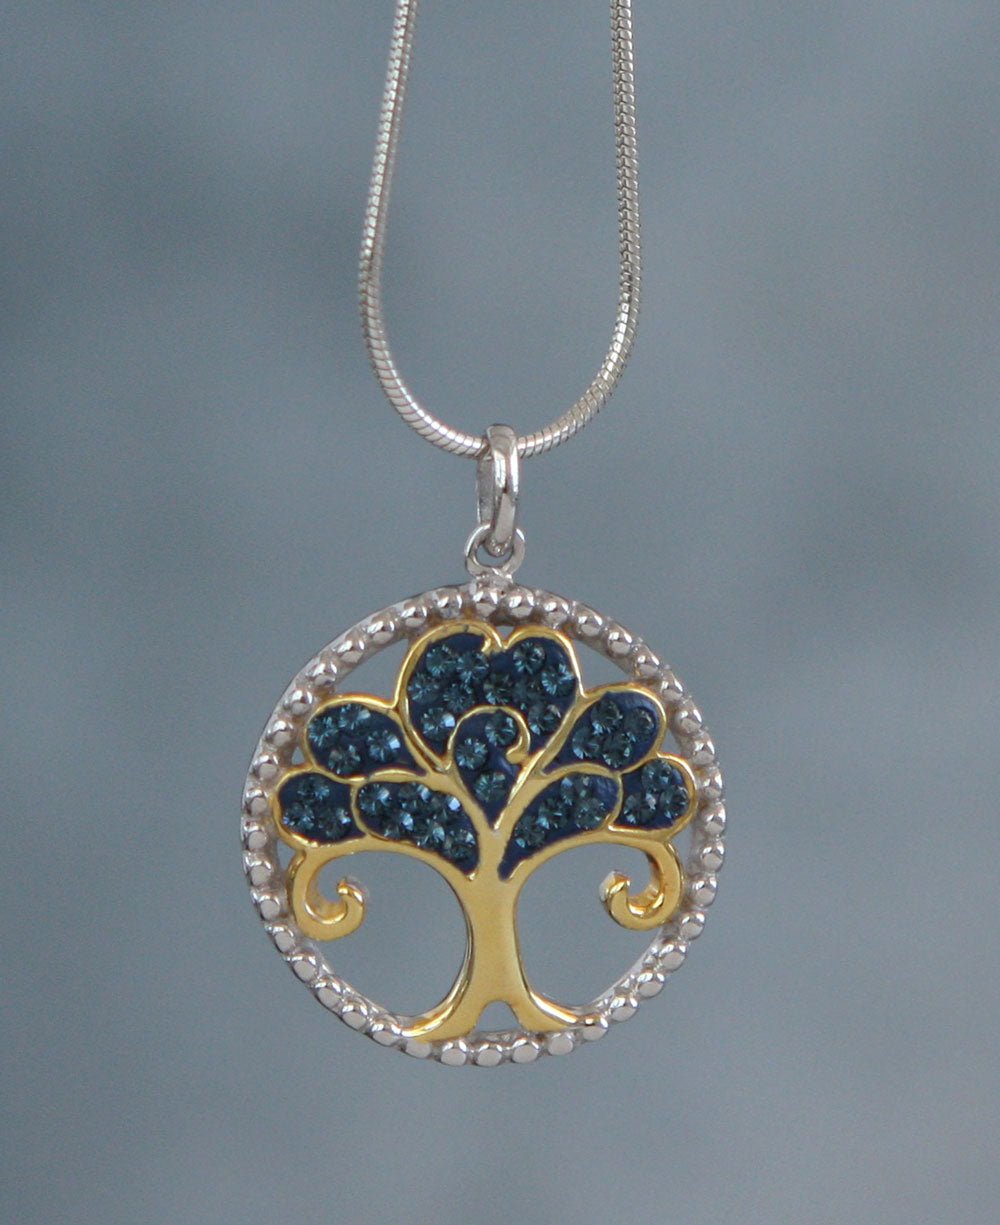 Gold Plated Tree of Life Pendant with Swarovski Crystals - Charms & Pendants